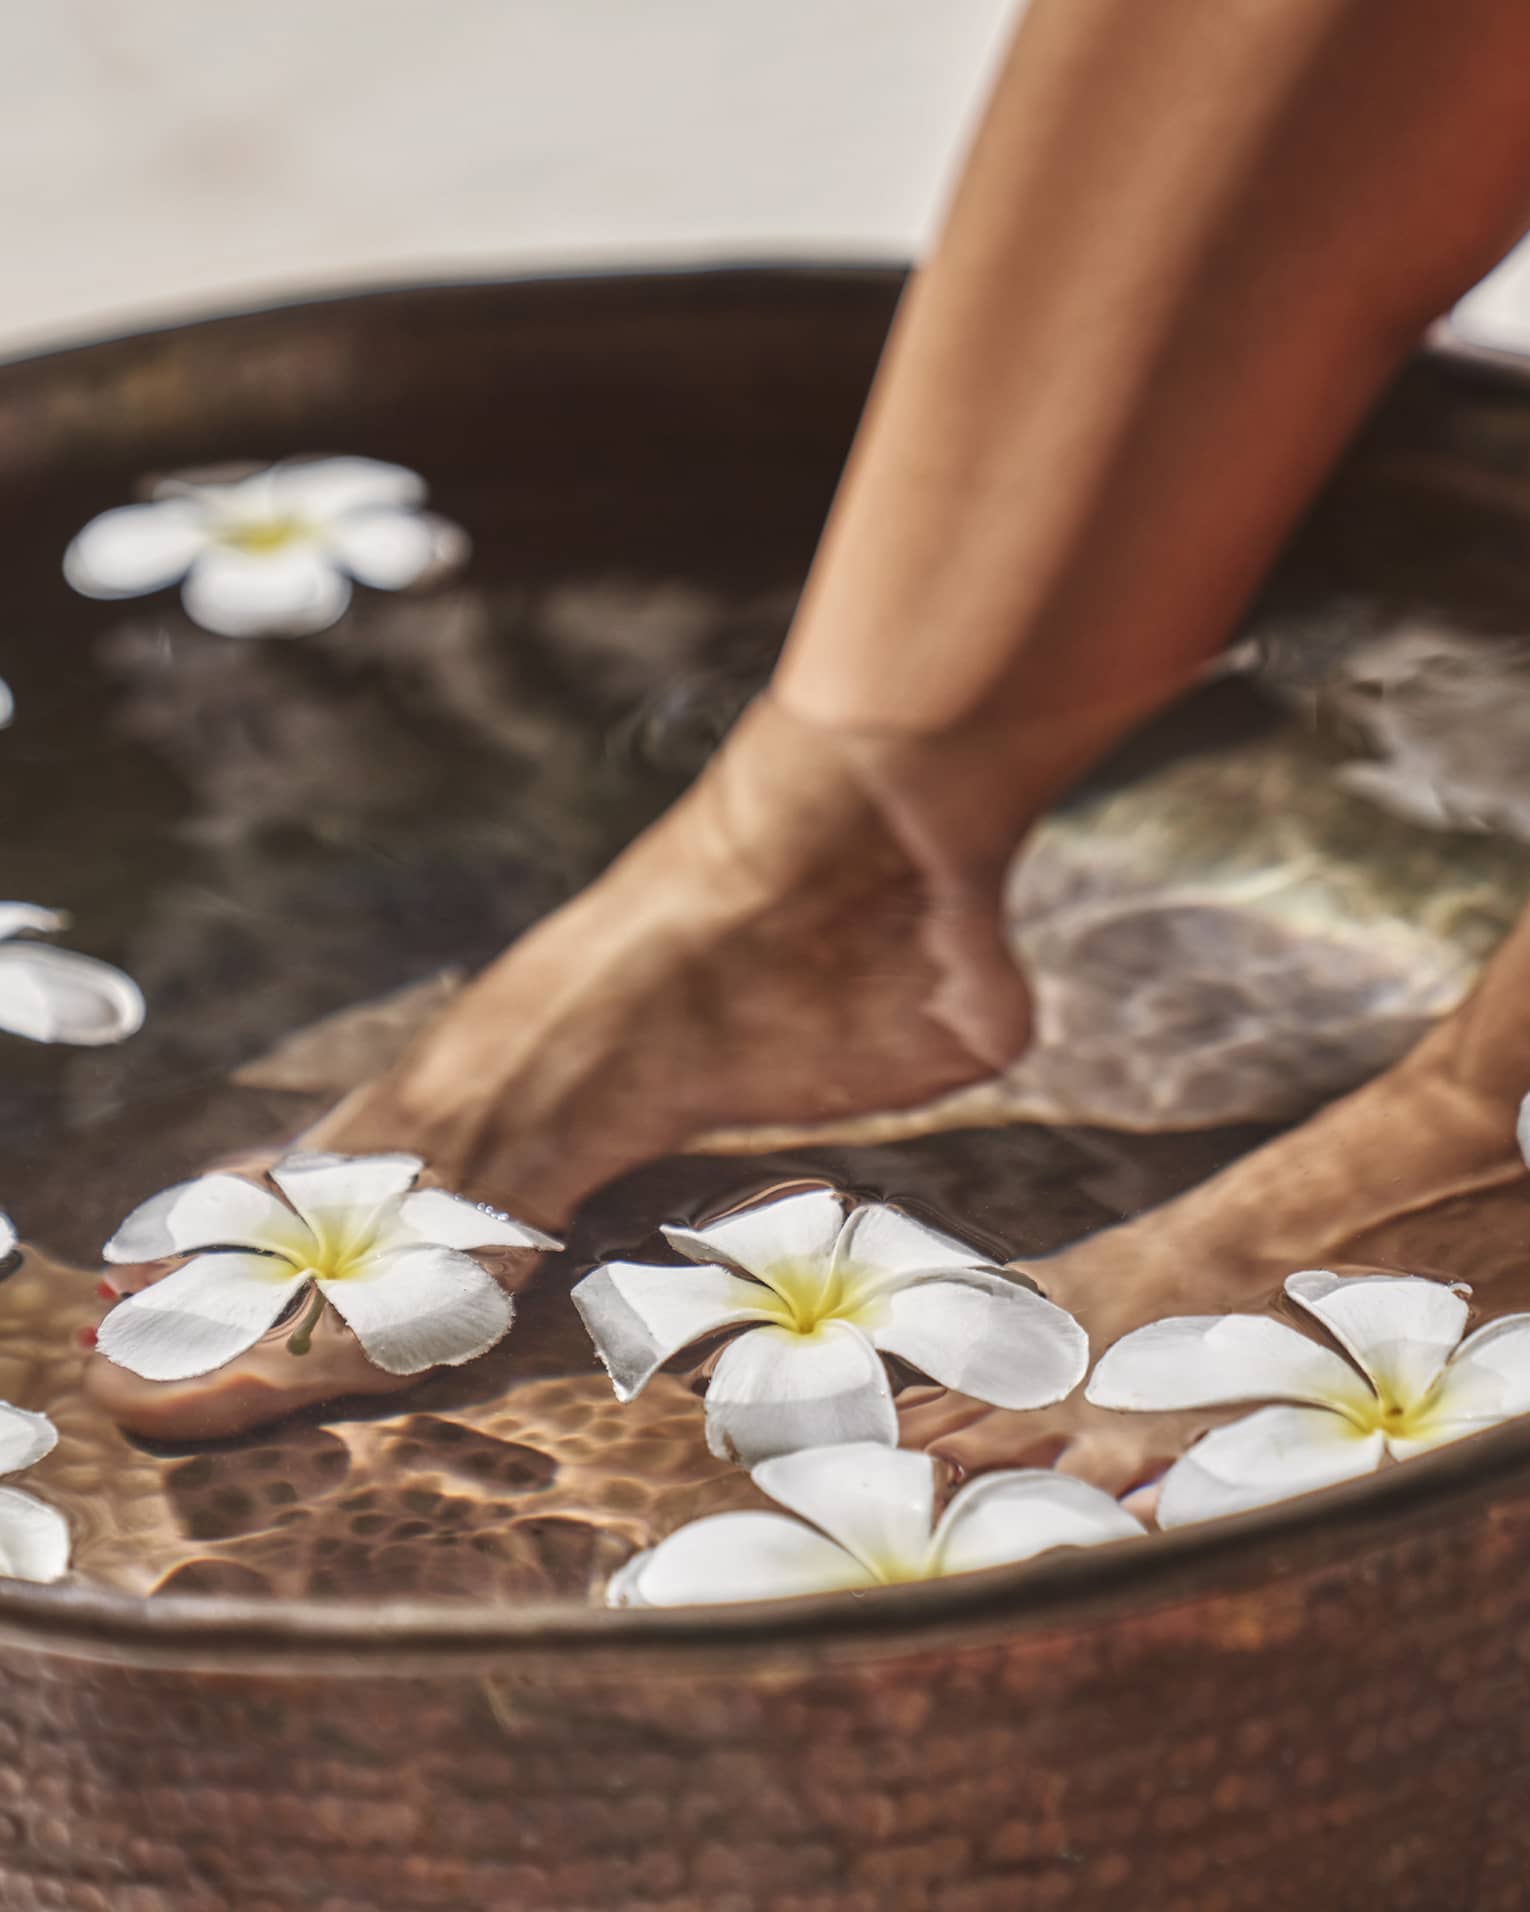 A woman's feet in a bowl of water and flowers.